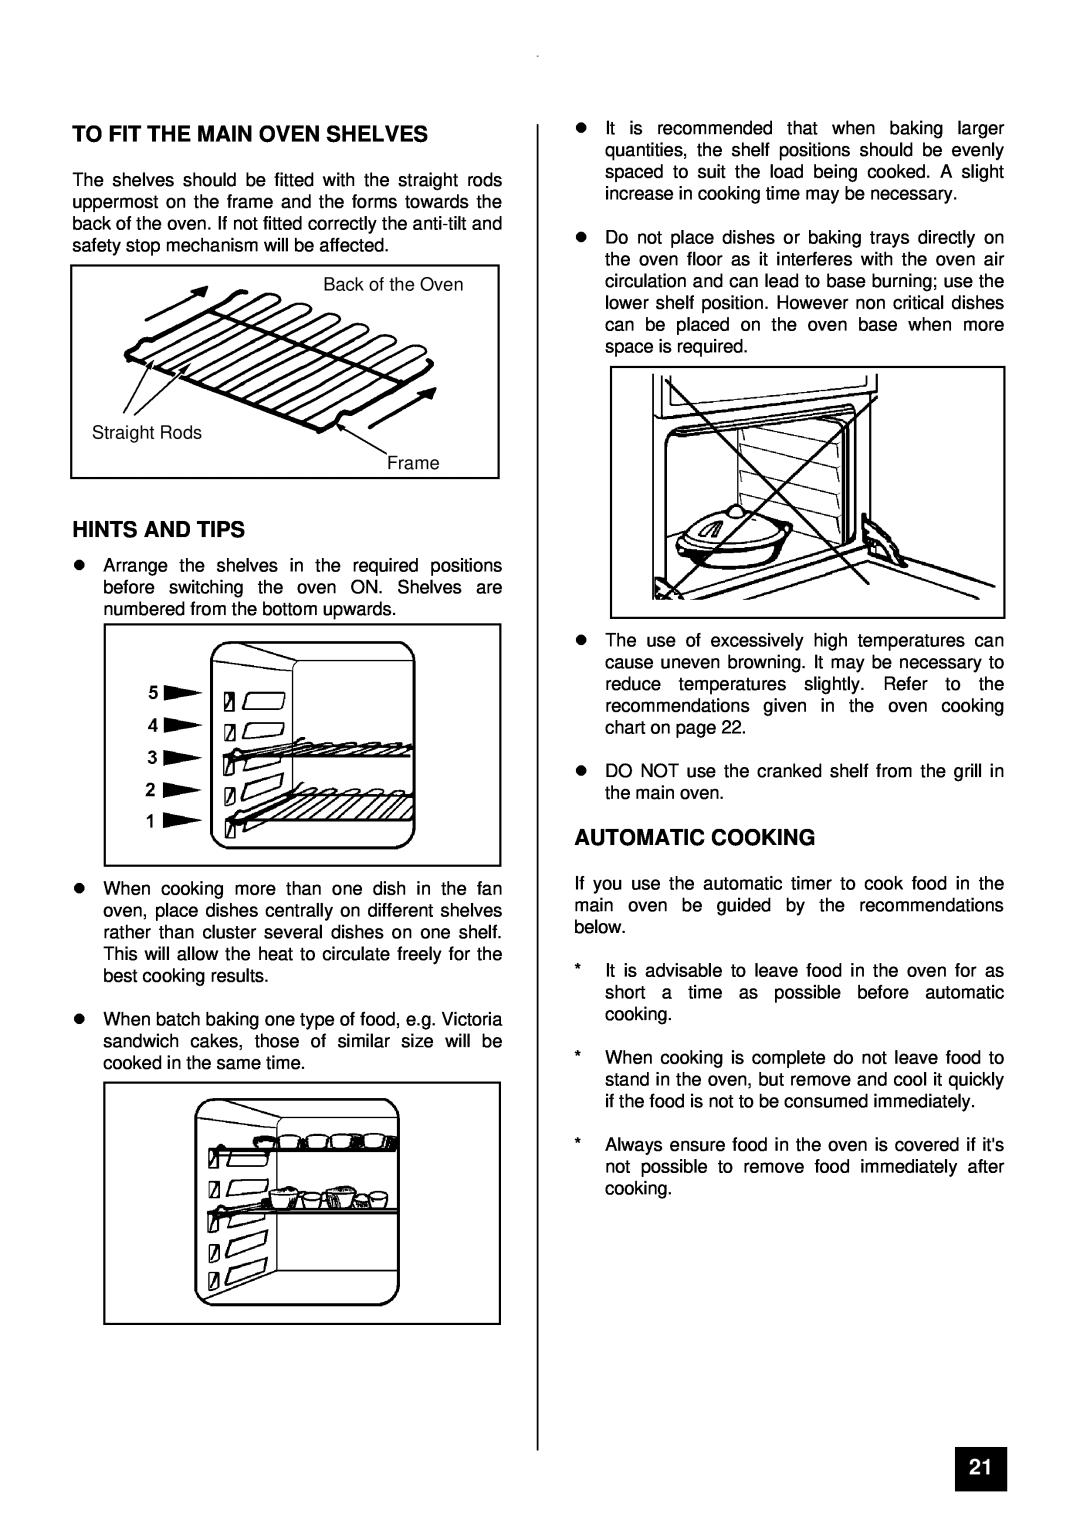 Tricity Bendix CSI 2400 installation instructions To Fit The Main Oven Shelves, lHINTS AND TIPS, Automatic Cooking 